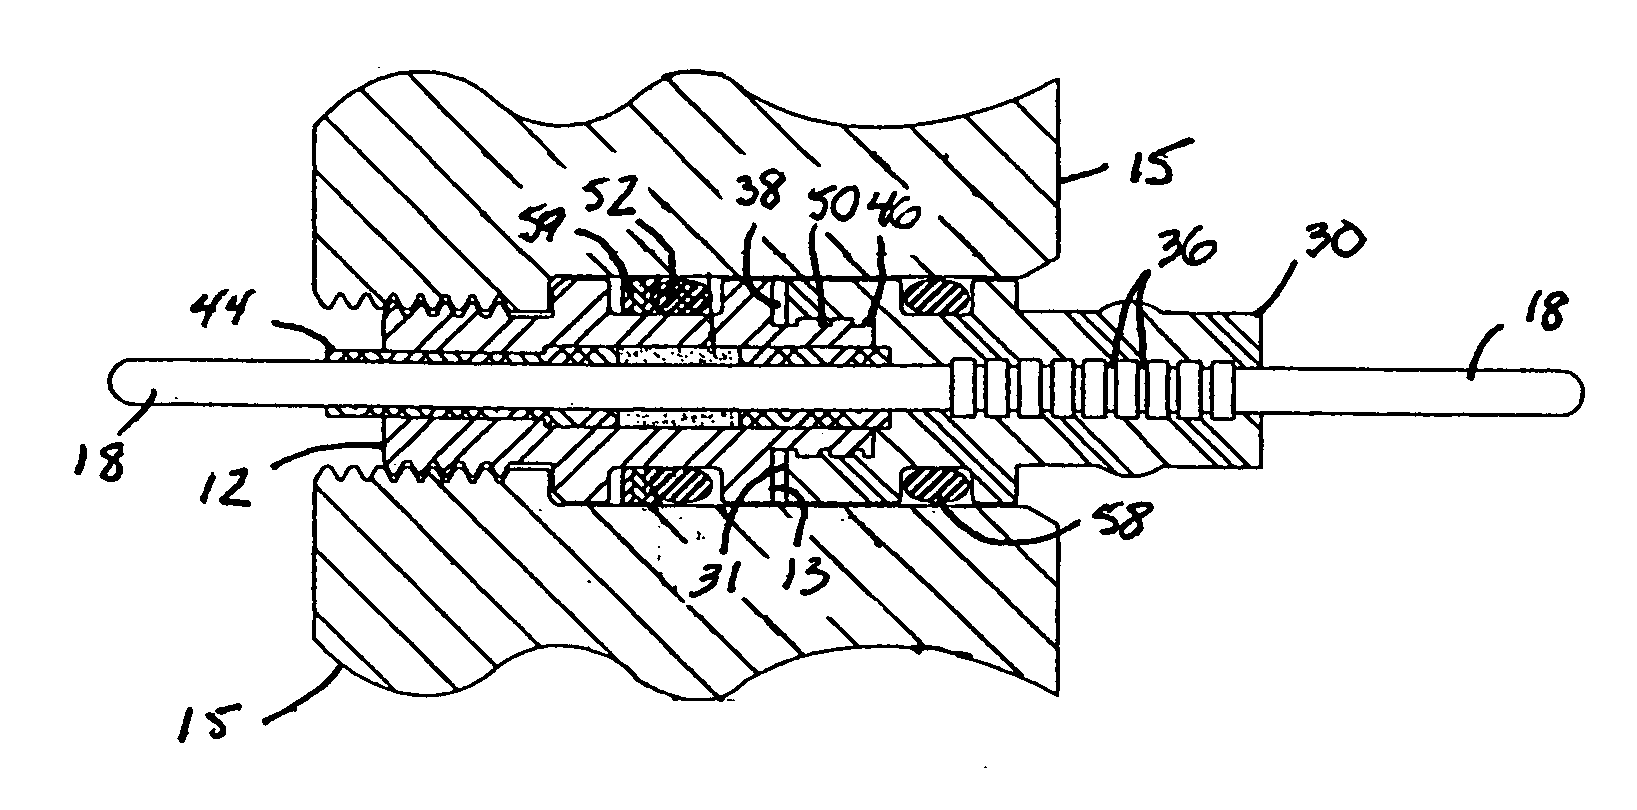 Hybrid glass-sealed electrical connectors